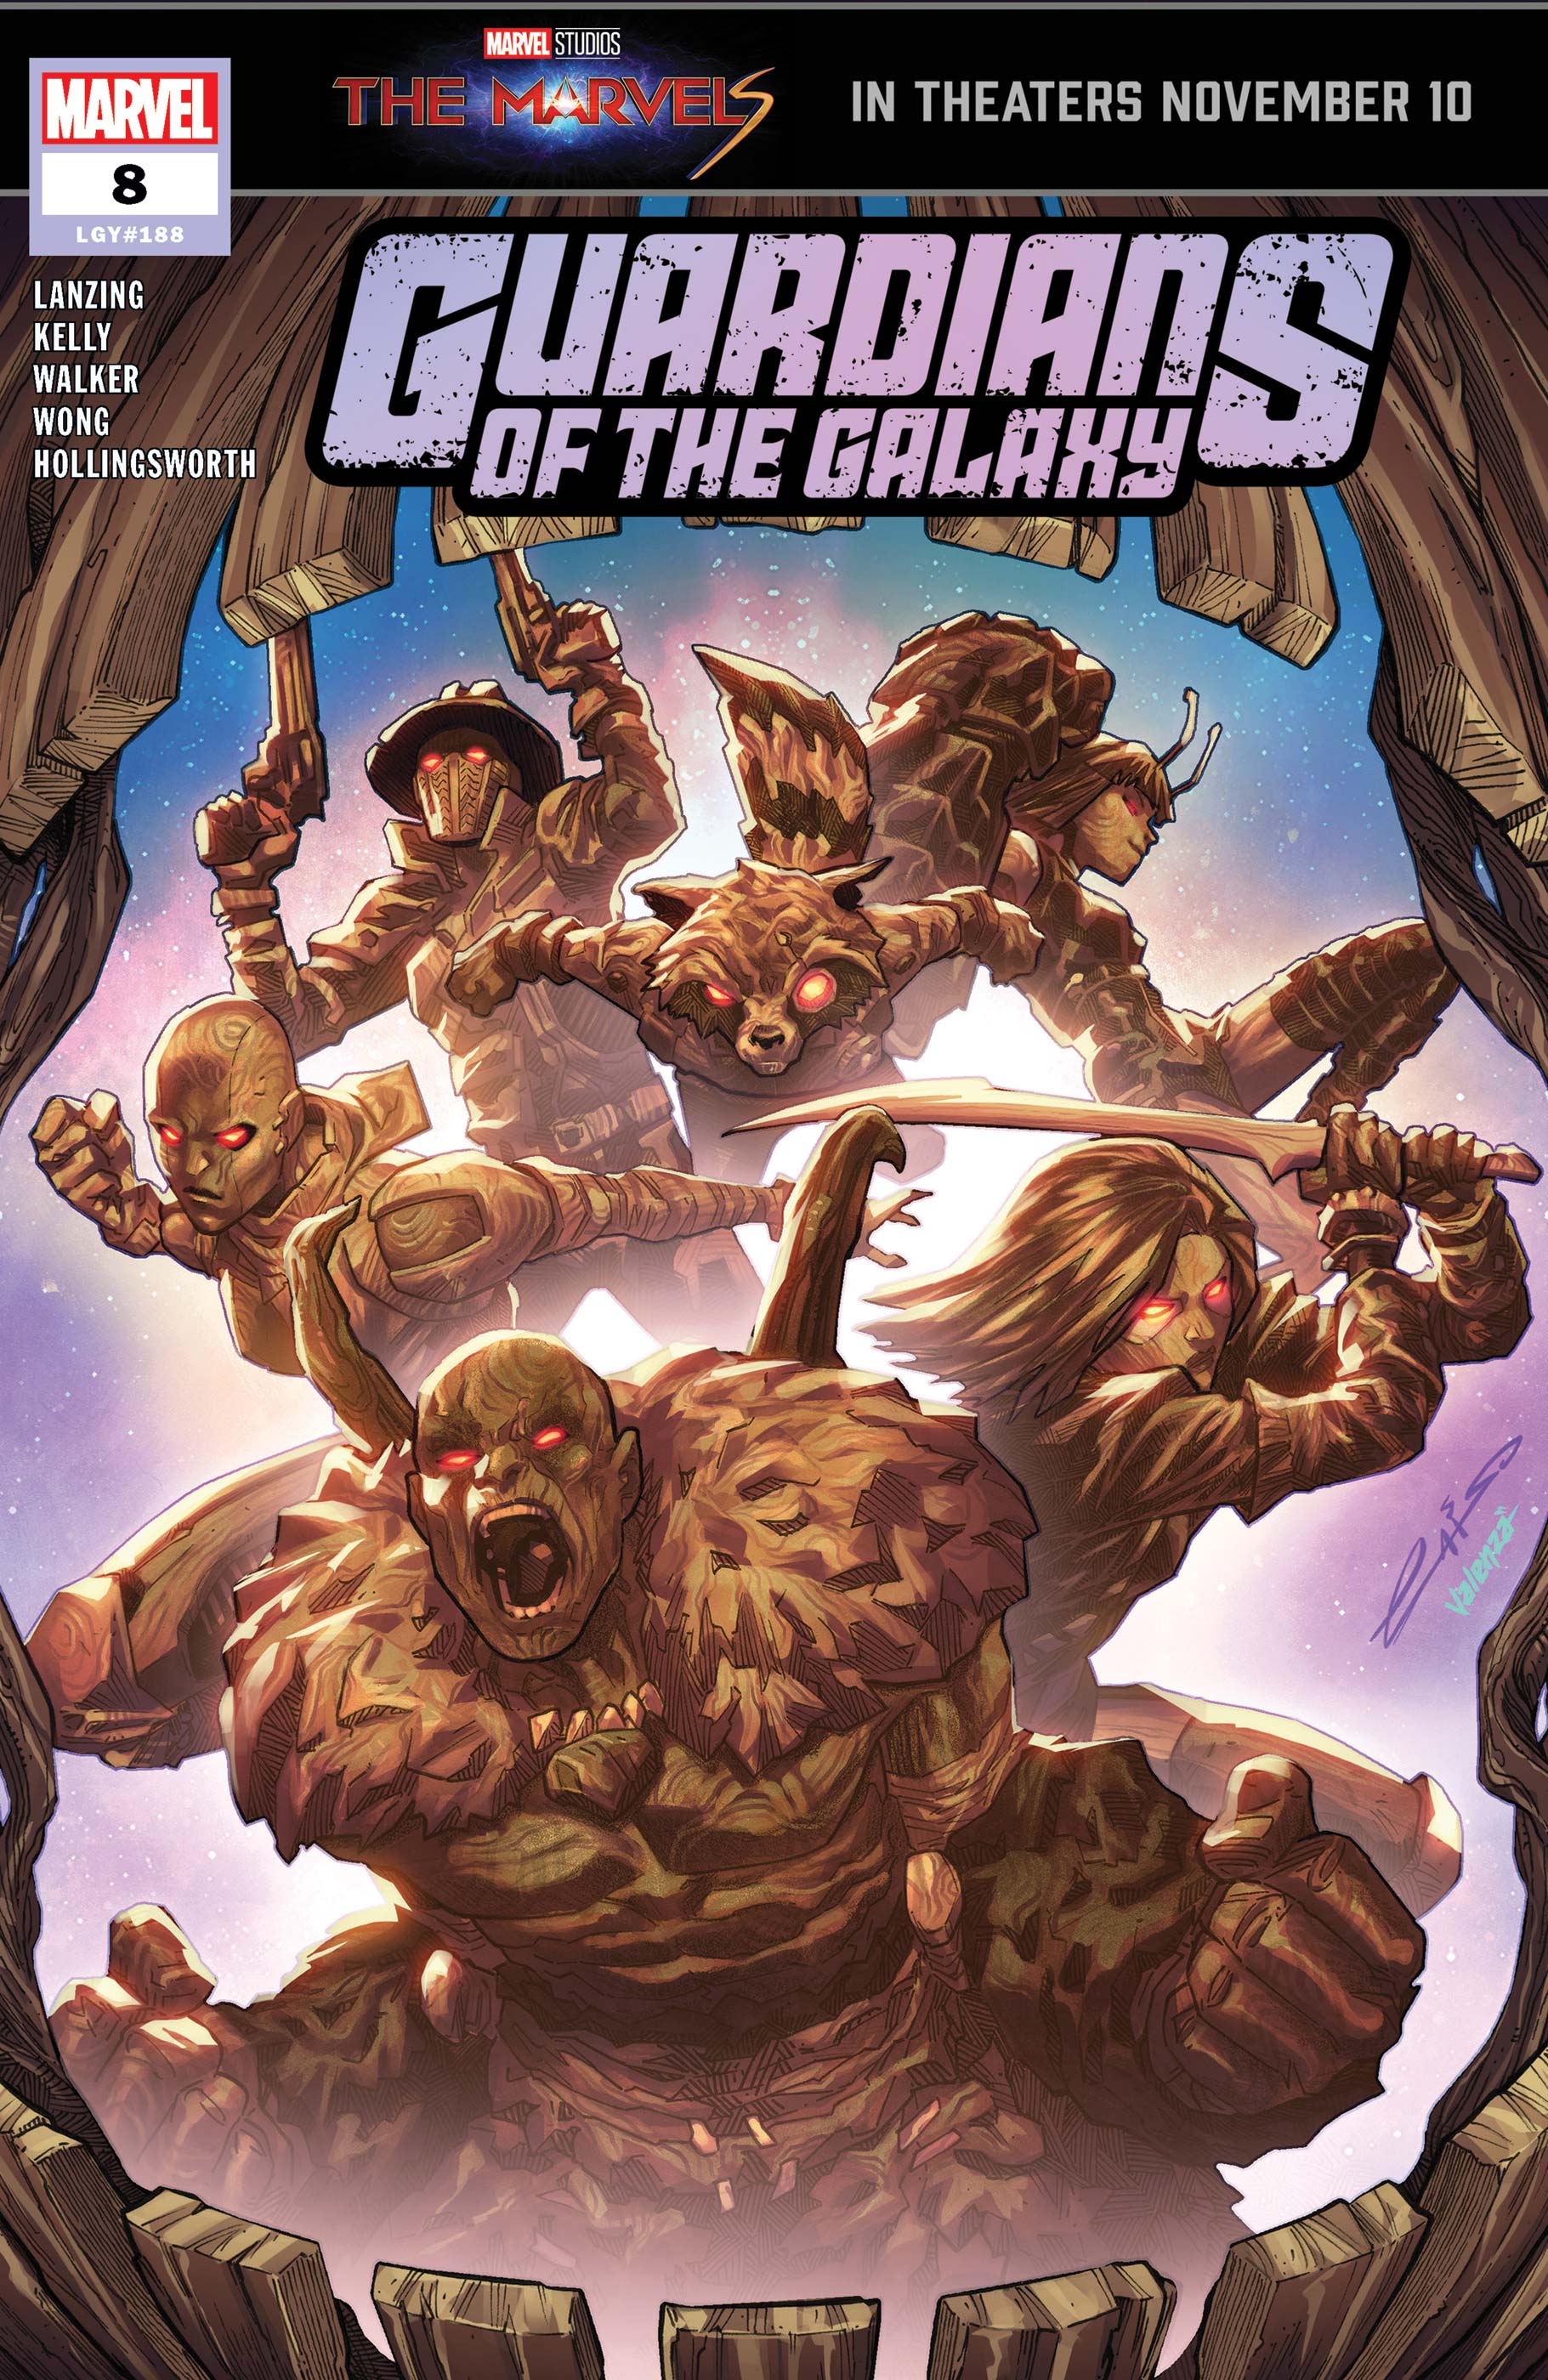 Guardians of the Galaxy Issue #8 LGY#188 November 2023 Cover A Comic Book